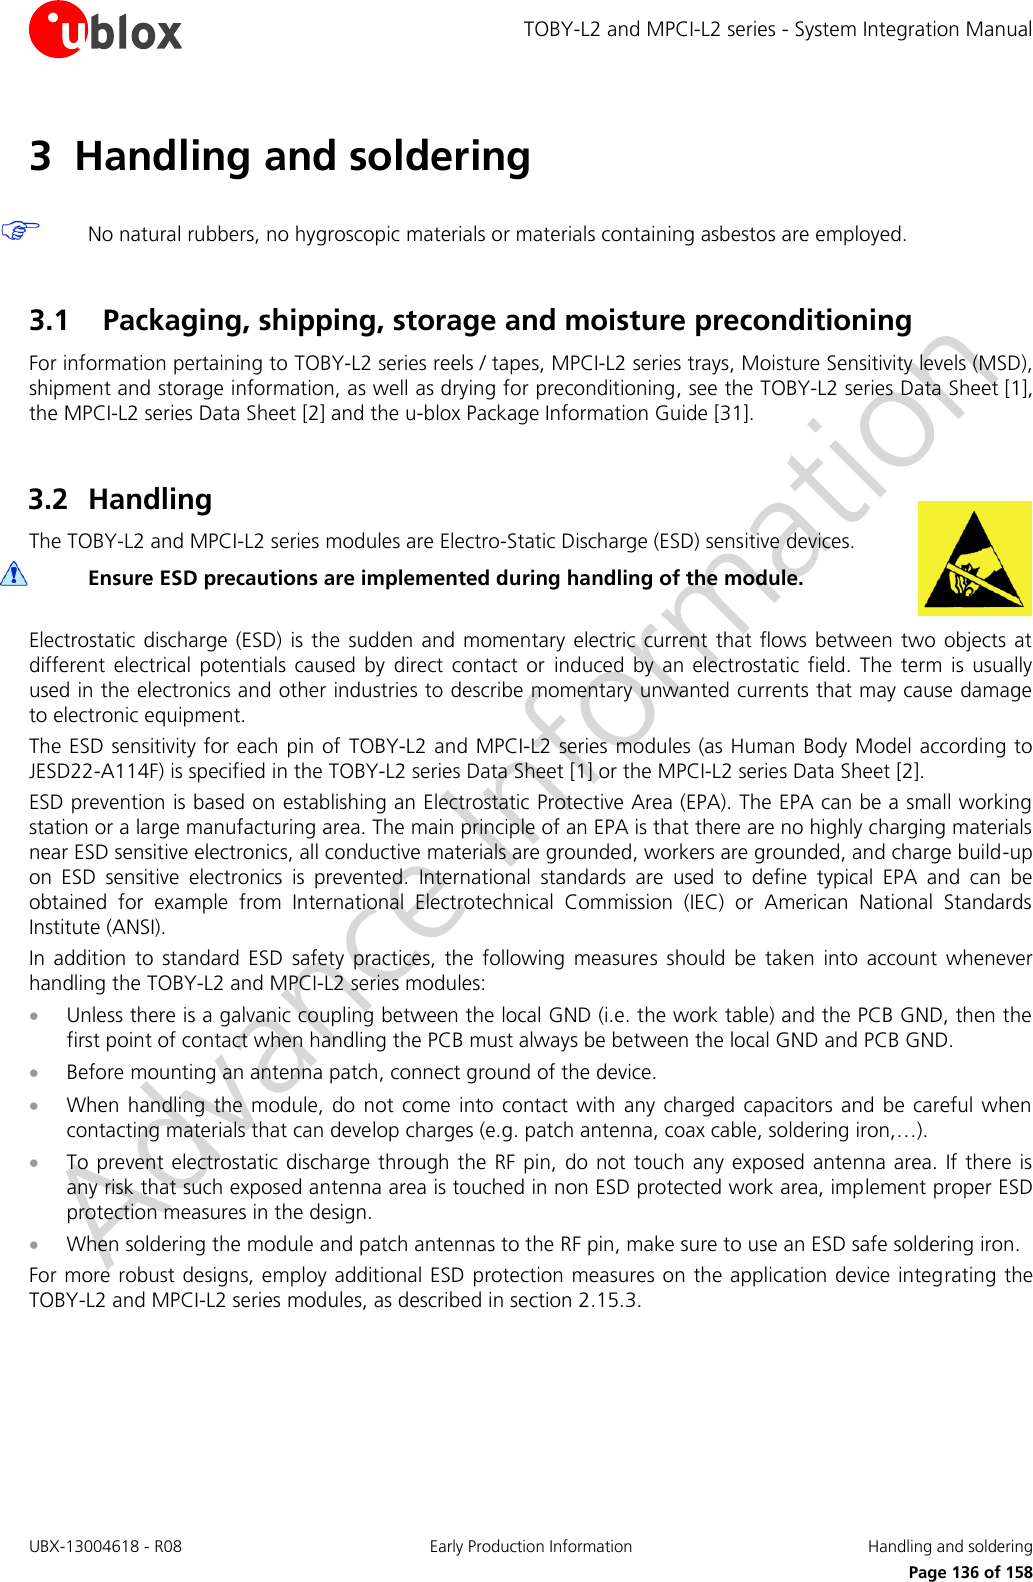 TOBY-L2 and MPCI-L2 series - System Integration Manual UBX-13004618 - R08  Early Production Information  Handling and soldering     Page 136 of 158 3 Handling and soldering   No natural rubbers, no hygroscopic materials or materials containing asbestos are employed.  3.1 Packaging, shipping, storage and moisture preconditioning For information pertaining to TOBY-L2 series reels / tapes, MPCI-L2 series trays, Moisture Sensitivity levels (MSD), shipment and storage information, as well as drying for preconditioning, see the TOBY-L2 series Data Sheet [1], the MPCI-L2 series Data Sheet [2] and the u-blox Package Information Guide [31].  3.2 Handling The TOBY-L2 and MPCI-L2 series modules are Electro-Static Discharge (ESD) sensitive devices.  Ensure ESD precautions are implemented during handling of the module.  Electrostatic  discharge  (ESD)  is the  sudden  and  momentary electric current  that flows  between  two  objects  at different  electrical  potentials  caused  by  direct  contact  or  induced  by  an  electrostatic  field.  The  term  is  usually used in the electronics and other industries to describe momentary unwanted currents that may cause damage to electronic equipment. The ESD sensitivity for each pin of  TOBY-L2 and MPCI-L2 series modules (as Human Body Model according to JESD22-A114F) is specified in the TOBY-L2 series Data Sheet [1] or the MPCI-L2 series Data Sheet [2]. ESD prevention is based on establishing an Electrostatic Protective Area (EPA). The EPA can be a small working station or a large manufacturing area. The main principle of an EPA is that there are no highly charging materials near ESD sensitive electronics, all conductive materials are grounded, workers are grounded, and charge build-up on  ESD  sensitive  electronics  is  prevented.  International  standards  are  used  to  define  typical  EPA  and  can  be obtained  for  example  from  International  Electrotechnical  Commission  (IEC)  or  American  National  Standards Institute (ANSI). In  addition  to  standard  ESD  safety  practices,  the  following  measures  should  be  taken  into  account  whenever handling the TOBY-L2 and MPCI-L2 series modules:  Unless there is a galvanic coupling between the local GND (i.e. the work table) and the PCB GND, then the first point of contact when handling the PCB must always be between the local GND and PCB GND.  Before mounting an antenna patch, connect ground of the device.  When  handling the  module,  do  not  come  into  contact  with any  charged  capacitors and  be  careful  when contacting materials that can develop charges (e.g. patch antenna, coax cable, soldering iron,…).  To prevent electrostatic  discharge through the  RF pin, do not  touch  any exposed  antenna  area.  If there is any risk that such exposed antenna area is touched in non ESD protected work area, implement proper ESD protection measures in the design.  When soldering the module and patch antennas to the RF pin, make sure to use an ESD safe soldering iron. For more robust designs, employ additional ESD protection measures on the application device integrating the TOBY-L2 and MPCI-L2 series modules, as described in section 2.15.3.  